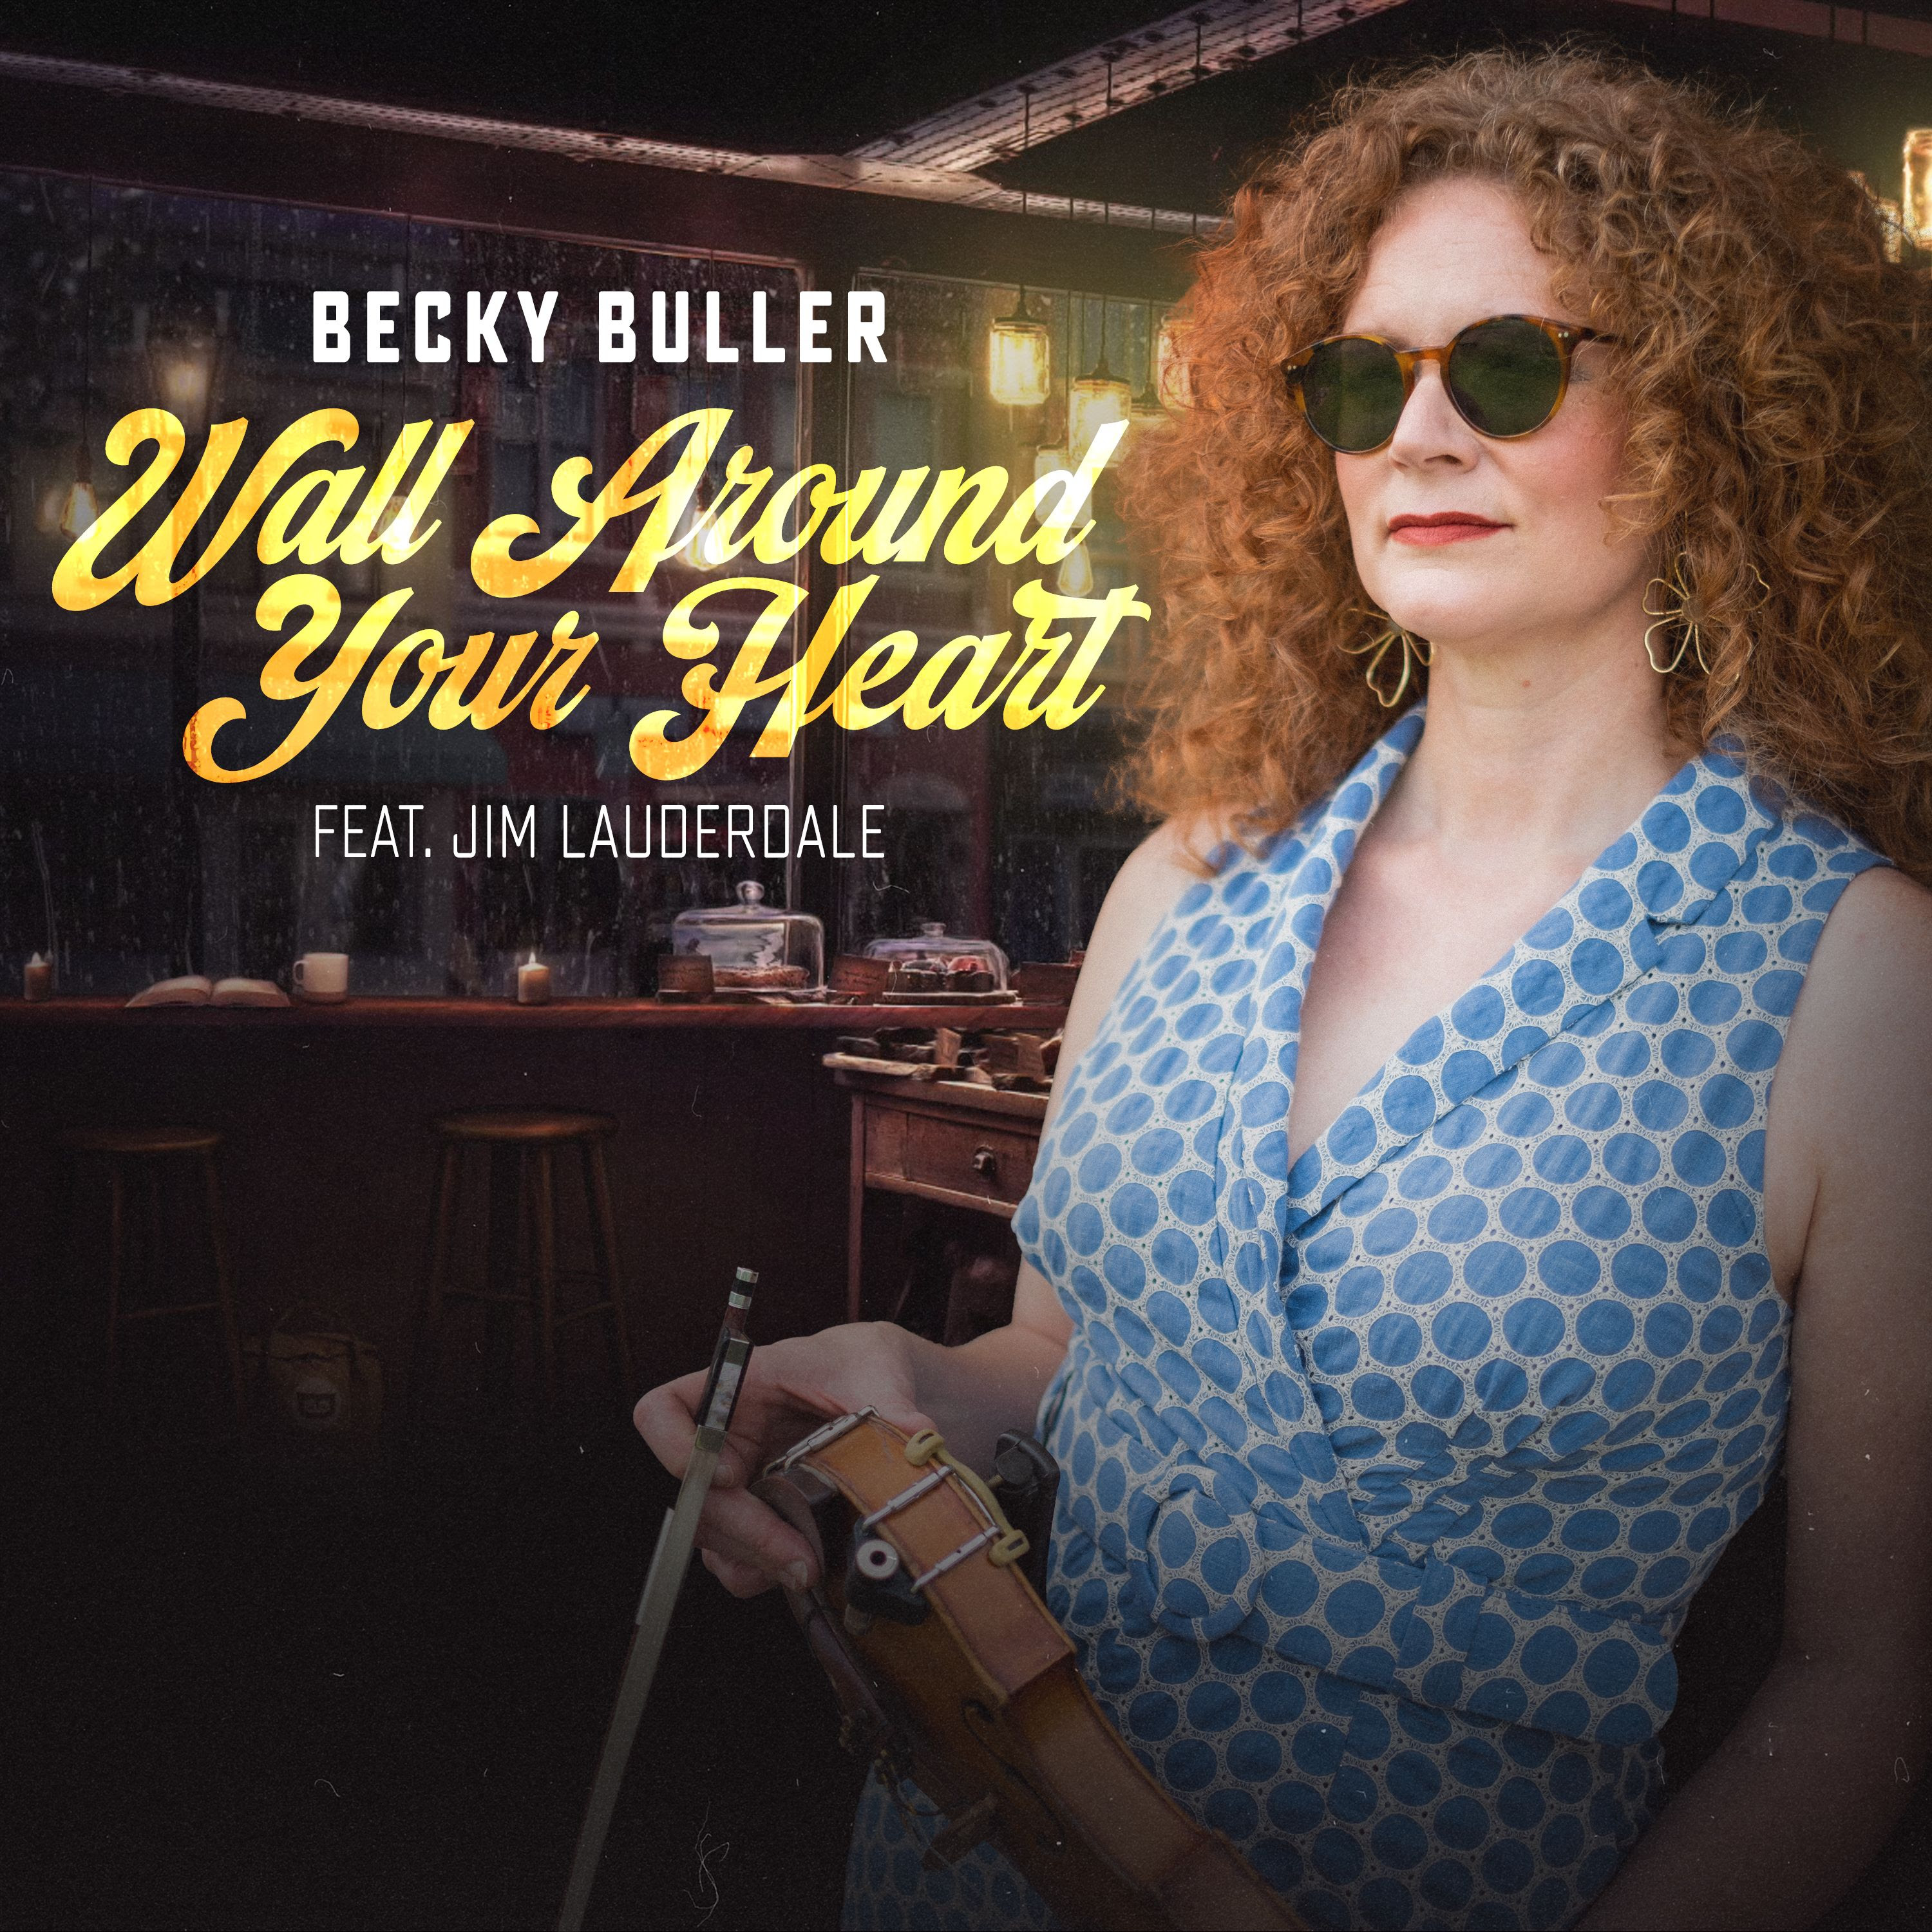 Becky Buller releases new single "Wall Around Your Heart", featuring Jim Lauderdale